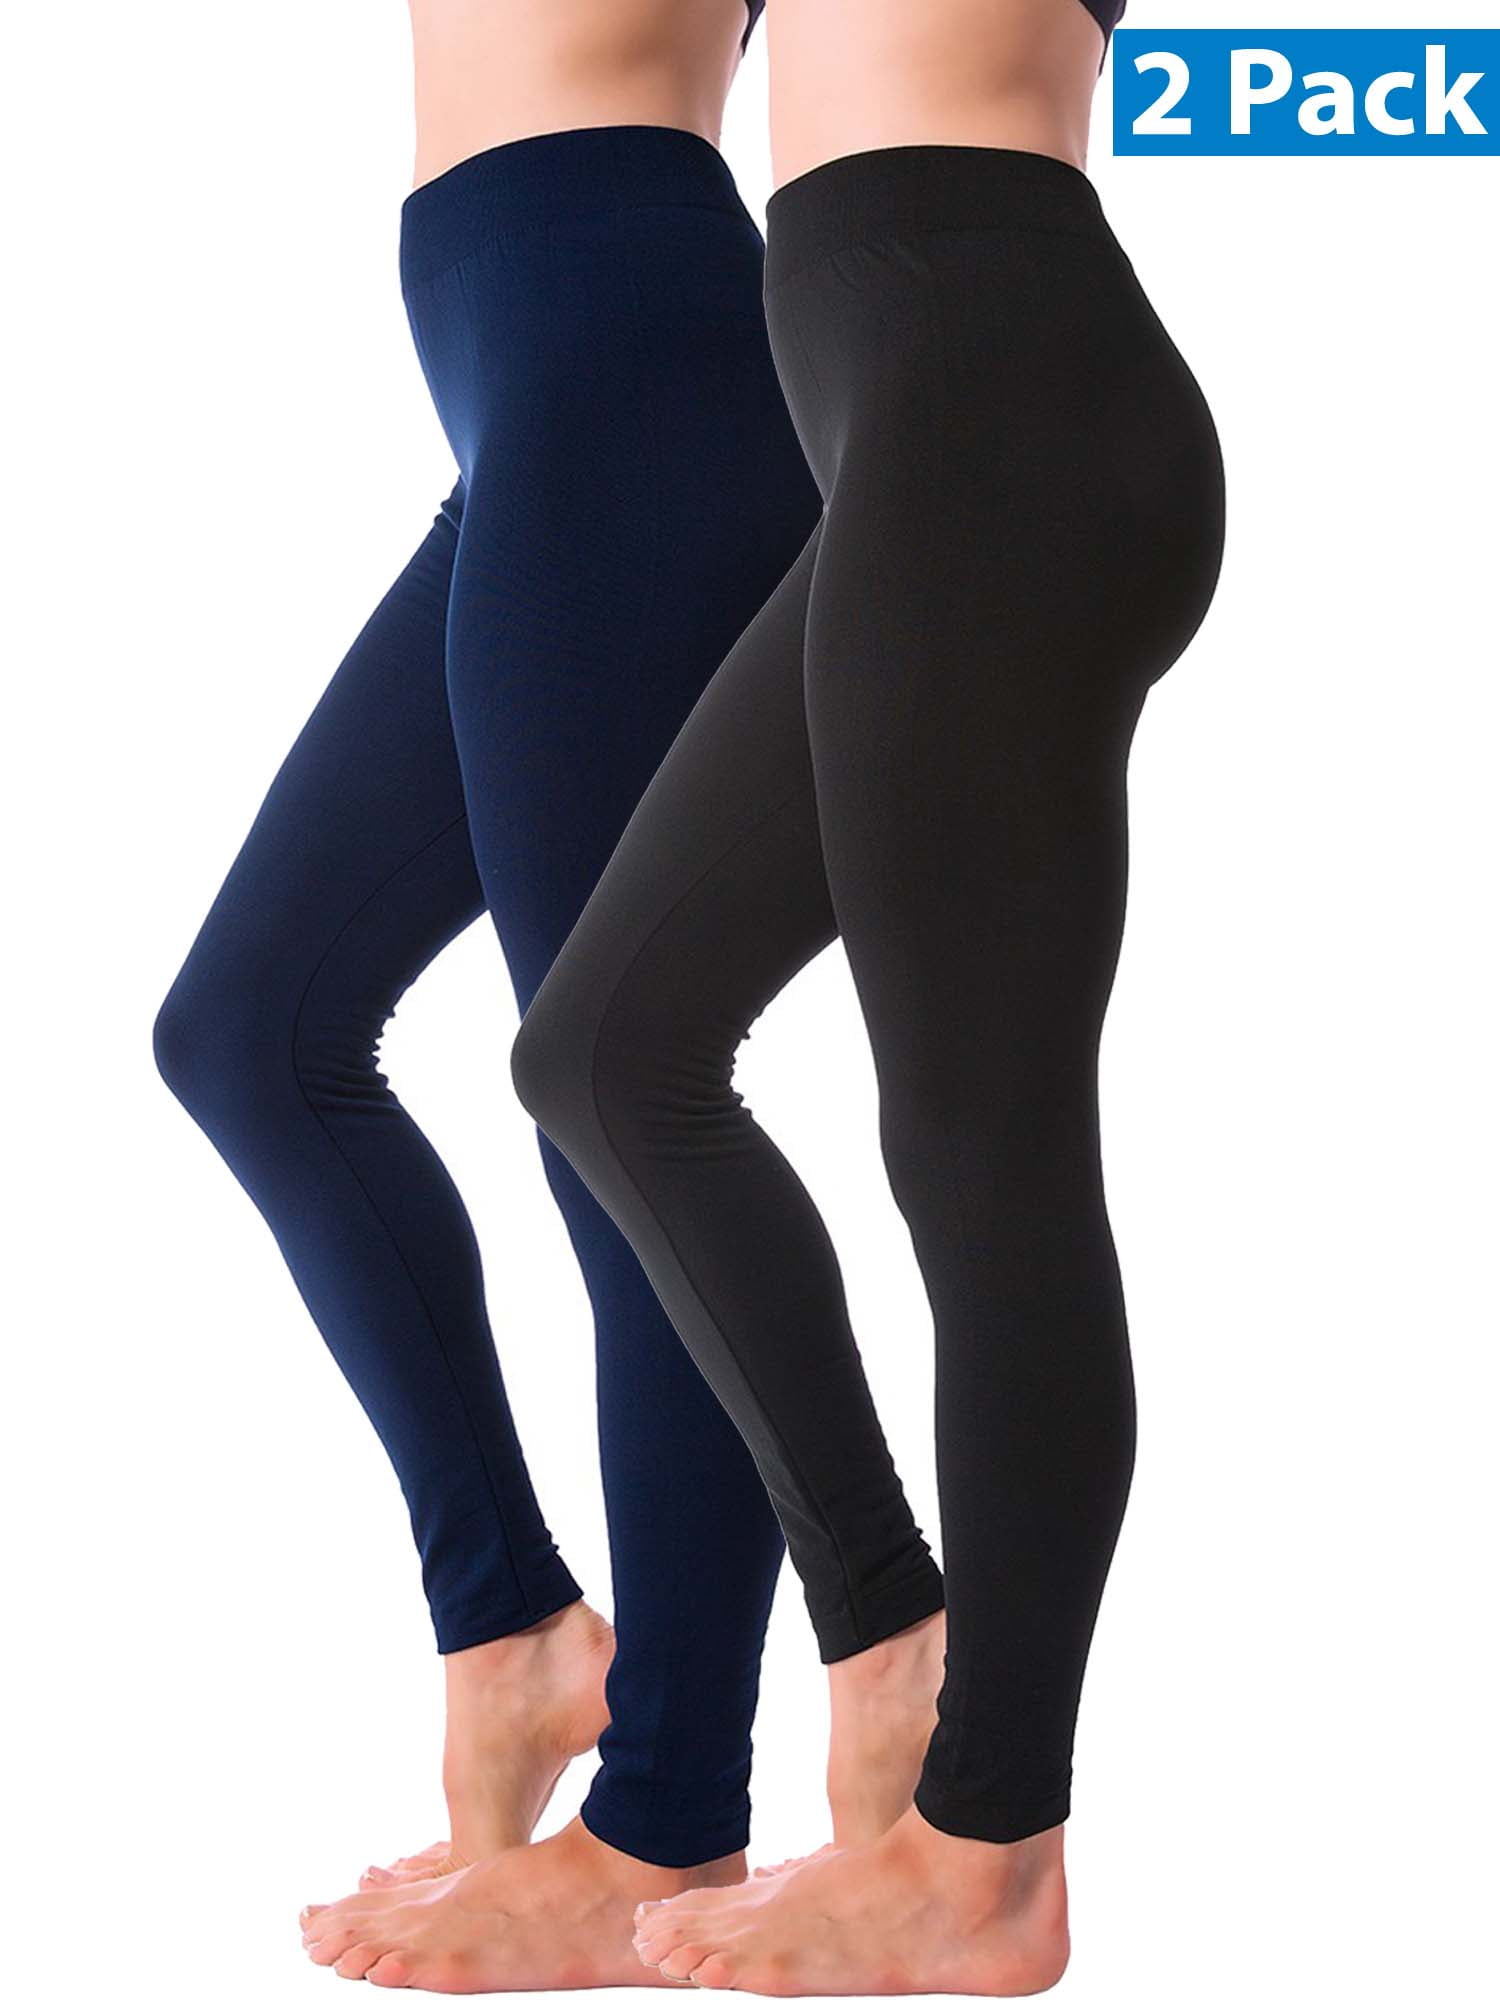 Fleece Lined Leggings for Women Cold Weather High Waist Tights Tummy Control Slim Fit Thick Plush Thermal Pants 